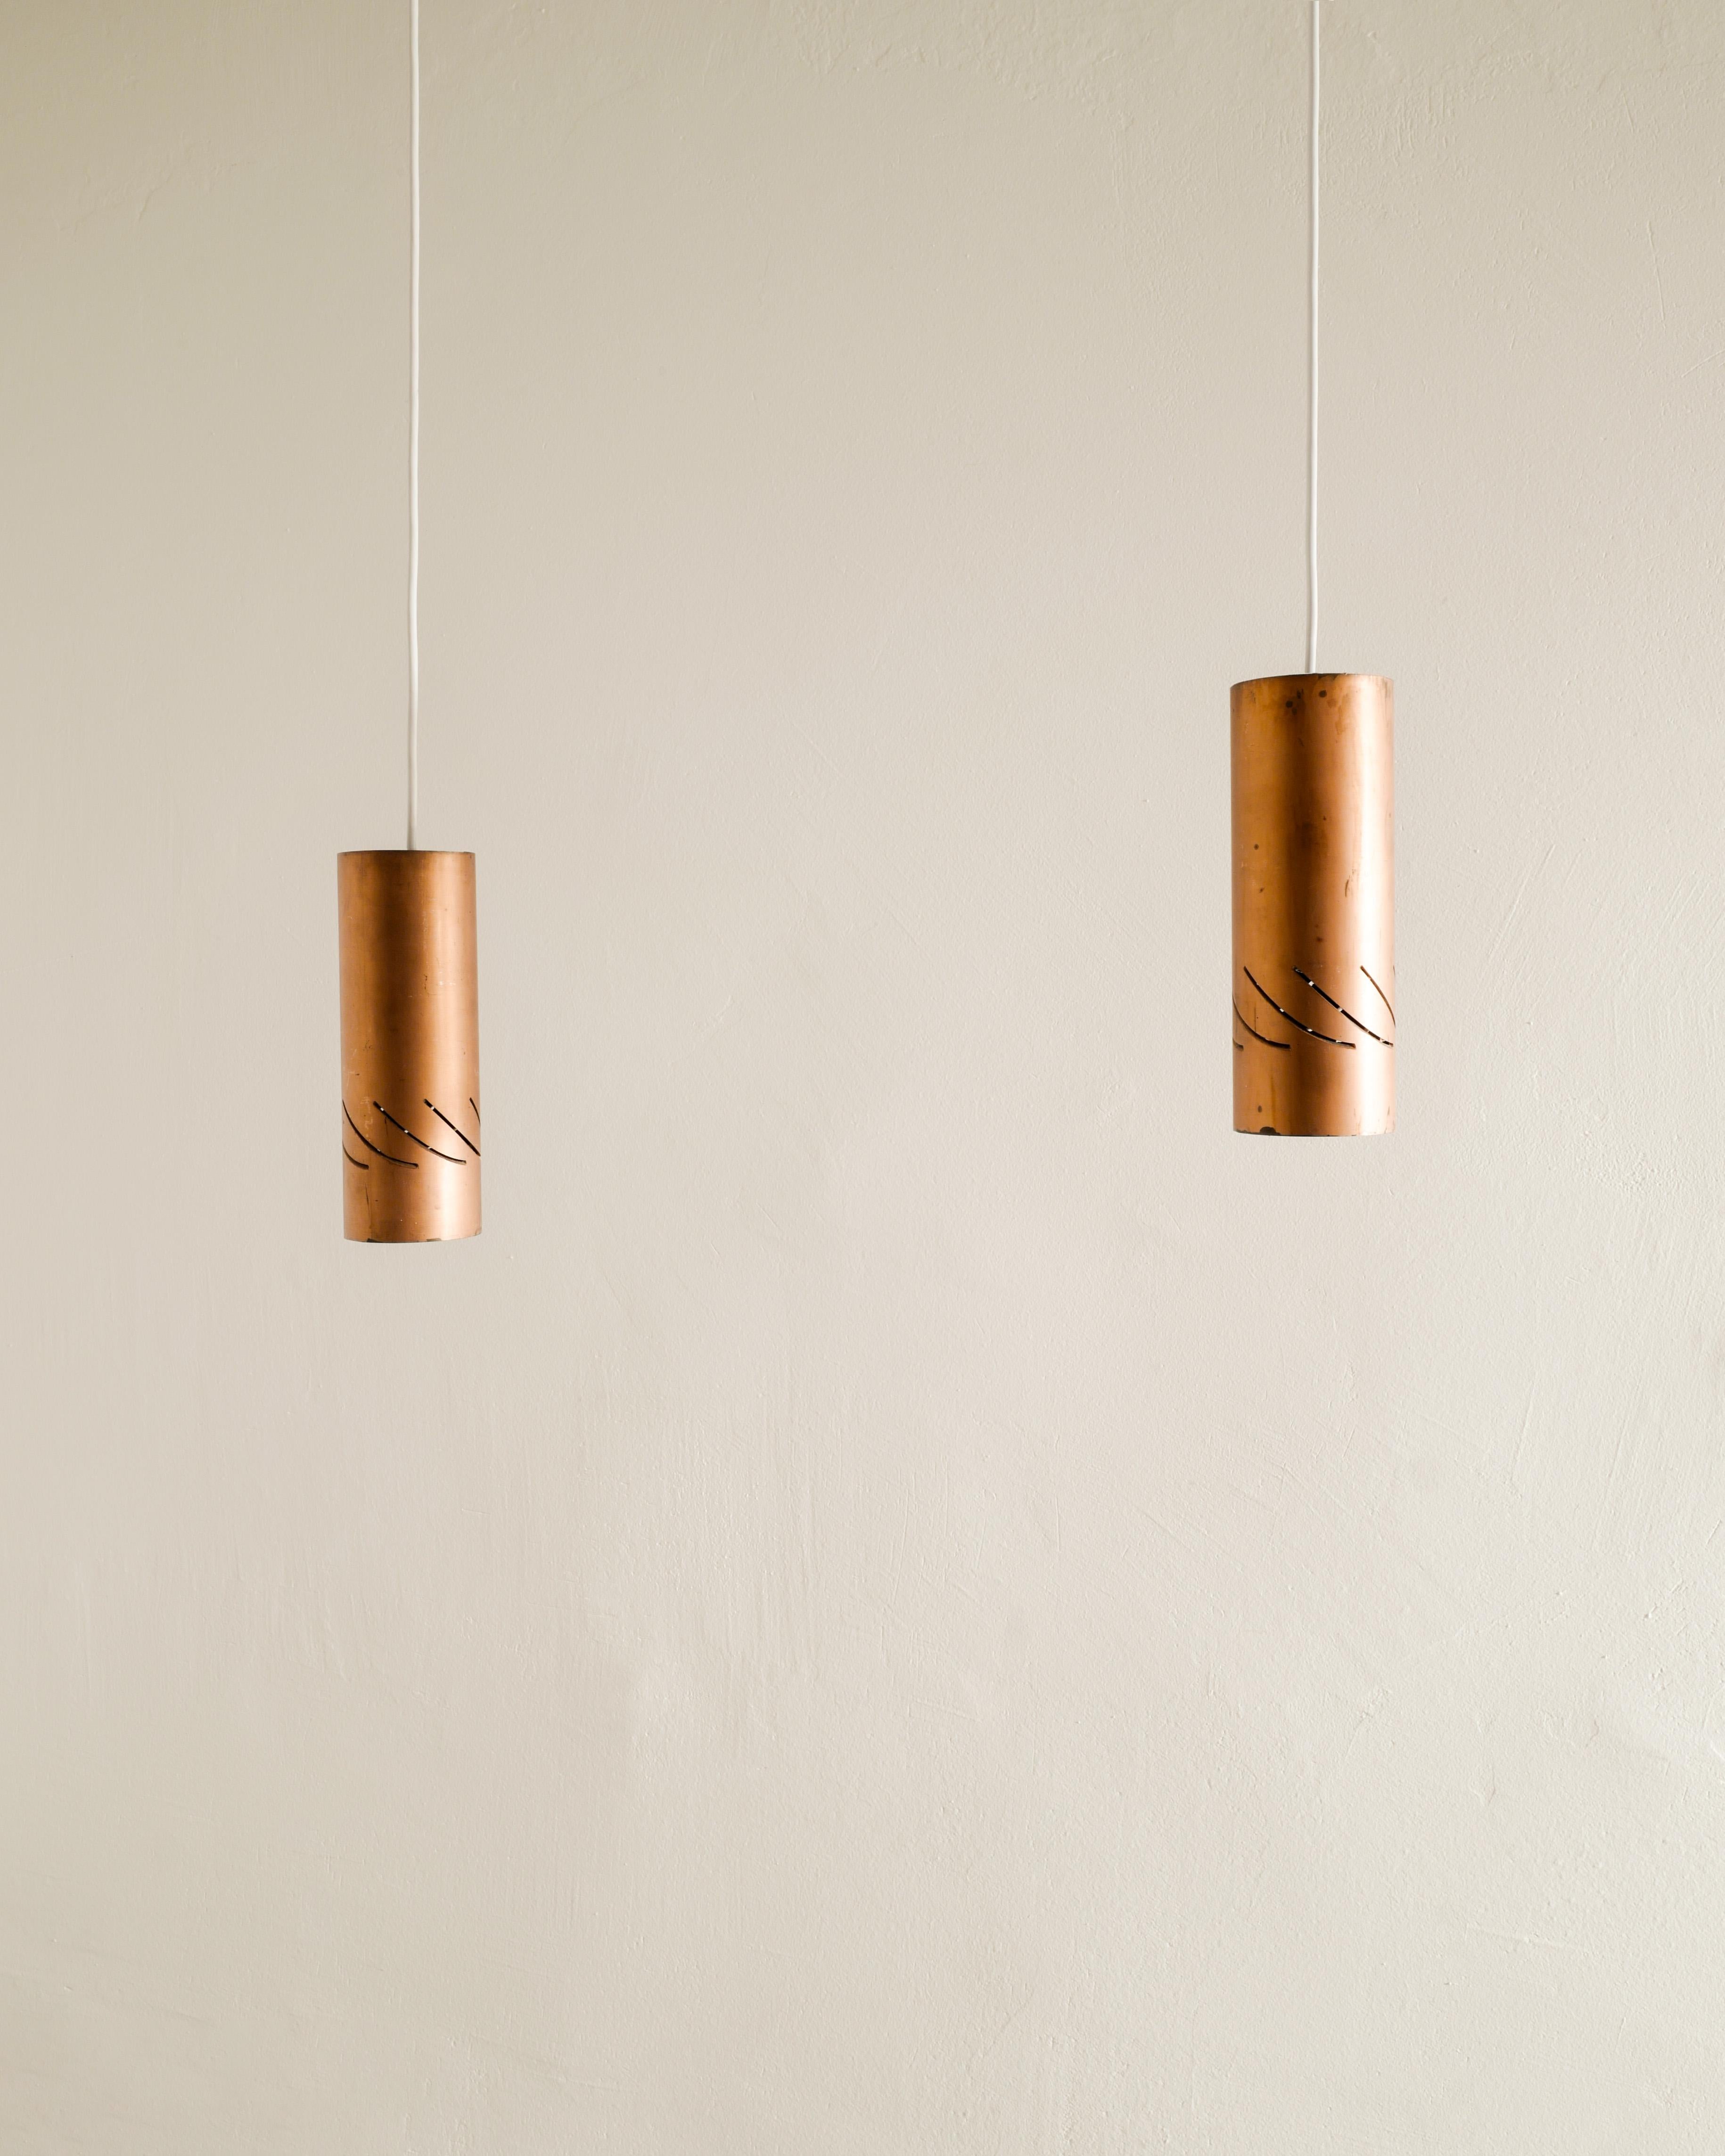 Rare and great set of four mid century copper cylinder pendants by anonymous designer produced in Sweden, 1960s. In good original condition with patina from age and use. Four pendants available. 

Dimensions: H: 23 cm / 9